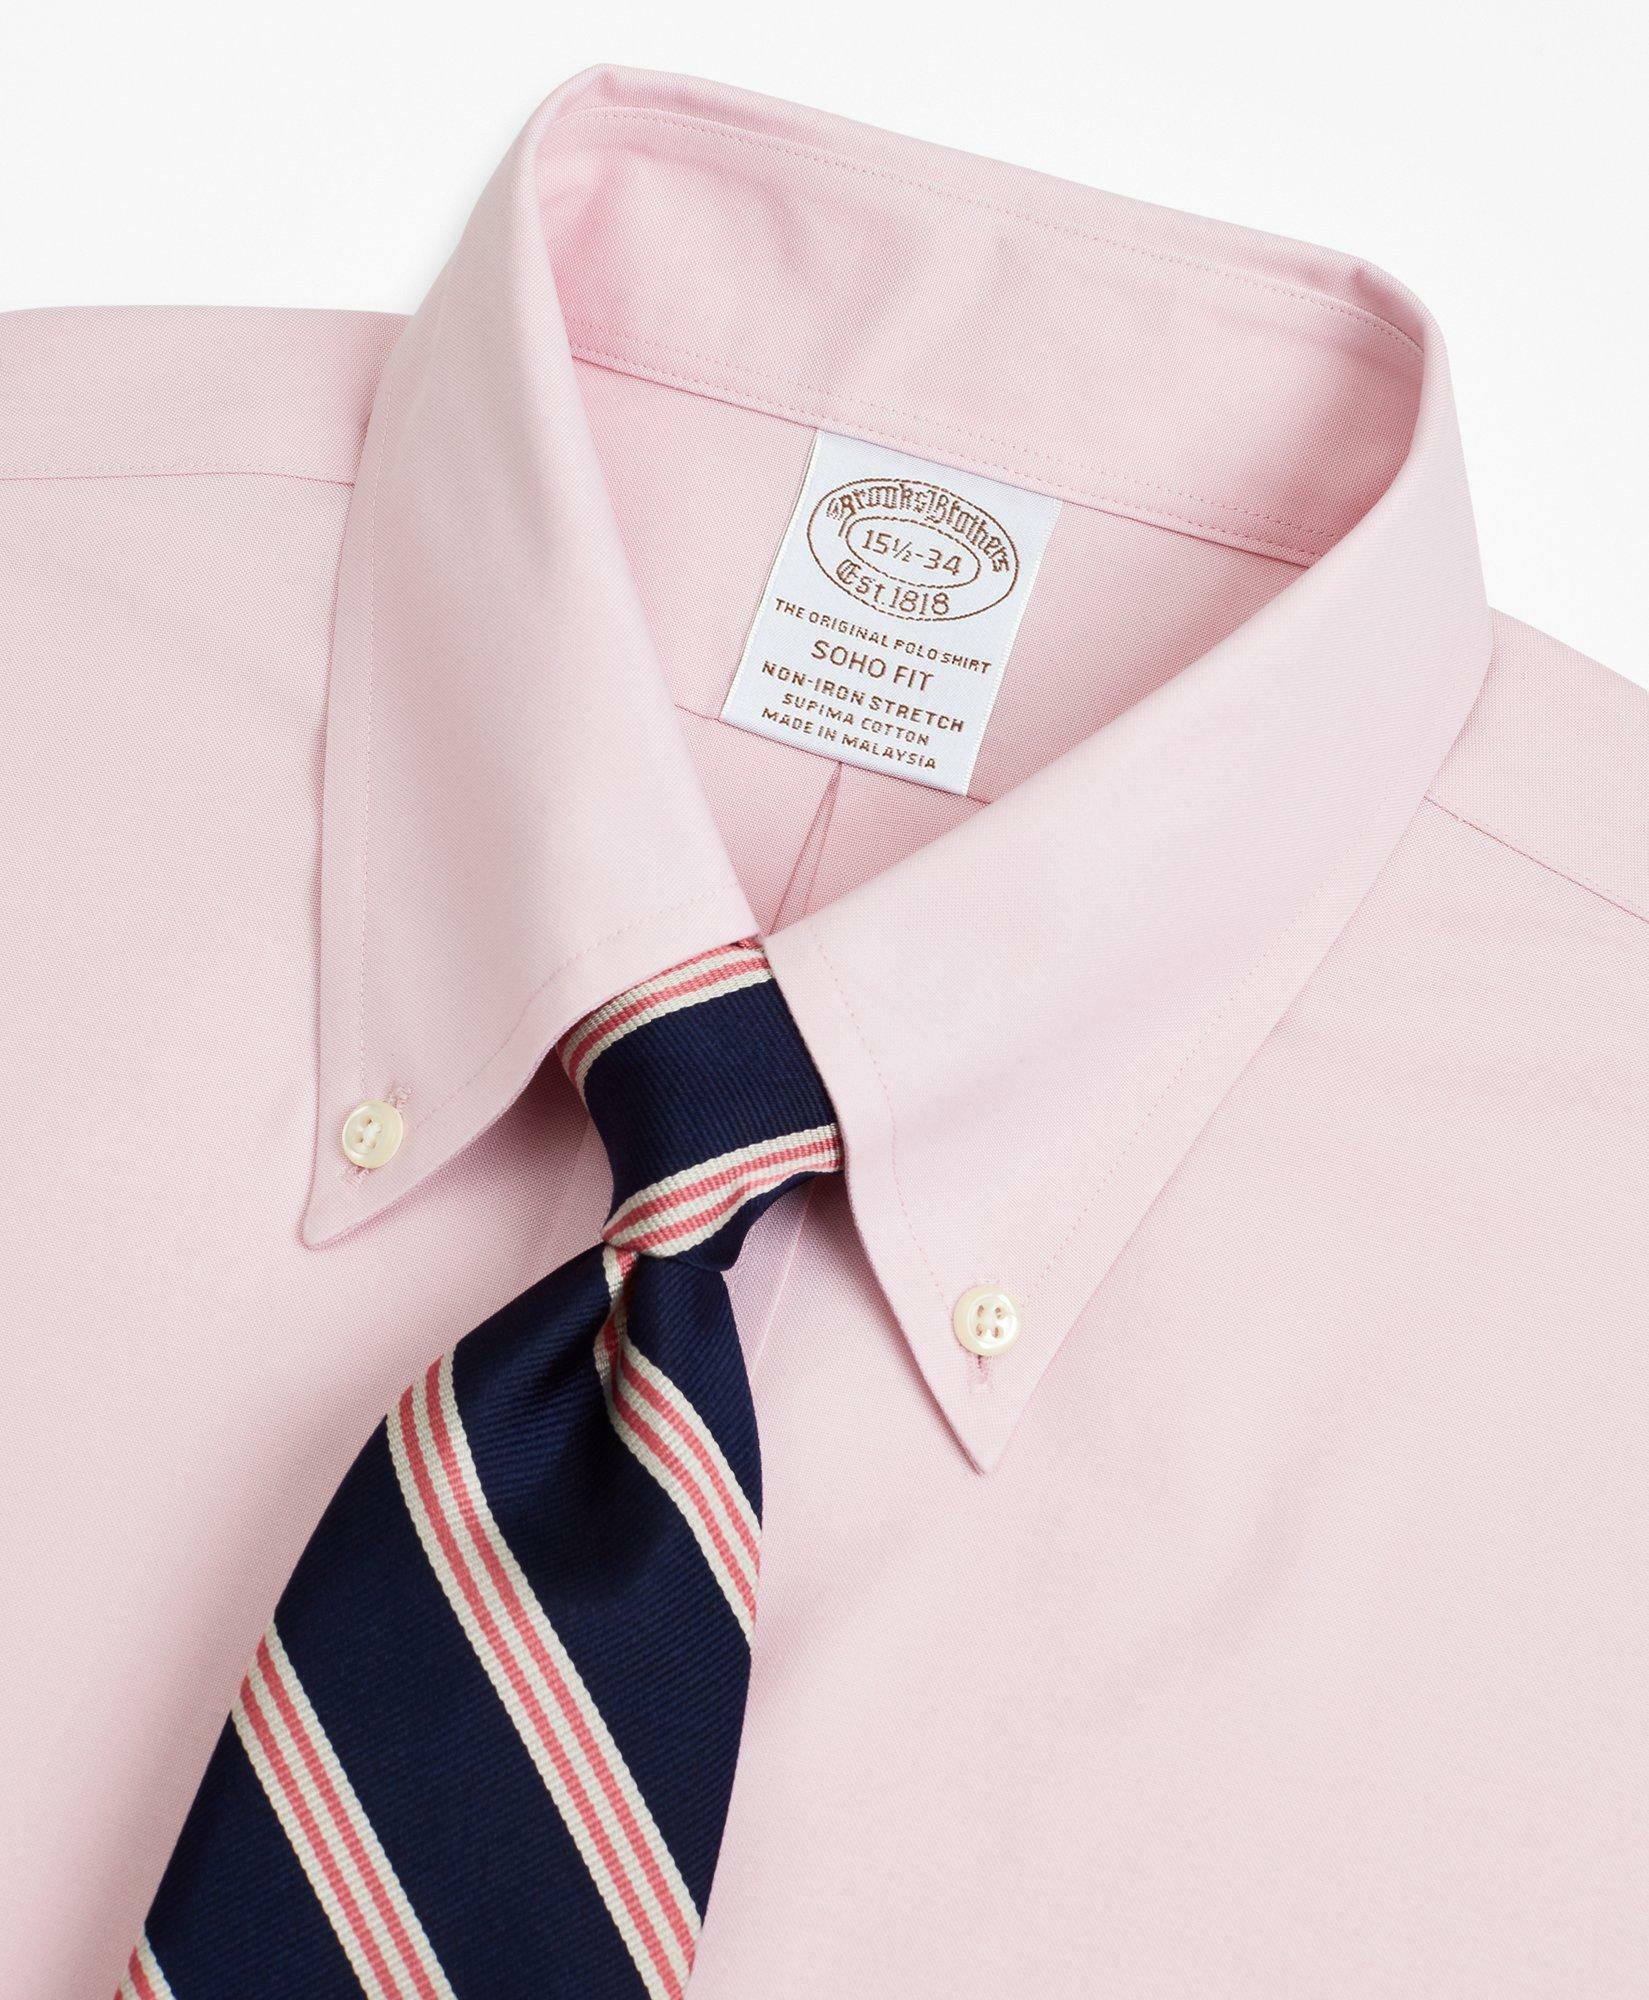 Brooks Brothers Men's Stretch Soho Extra-Slim-Fit Dress Shirt, Non-Iron Pinpoint Button-Down Collar | Pink